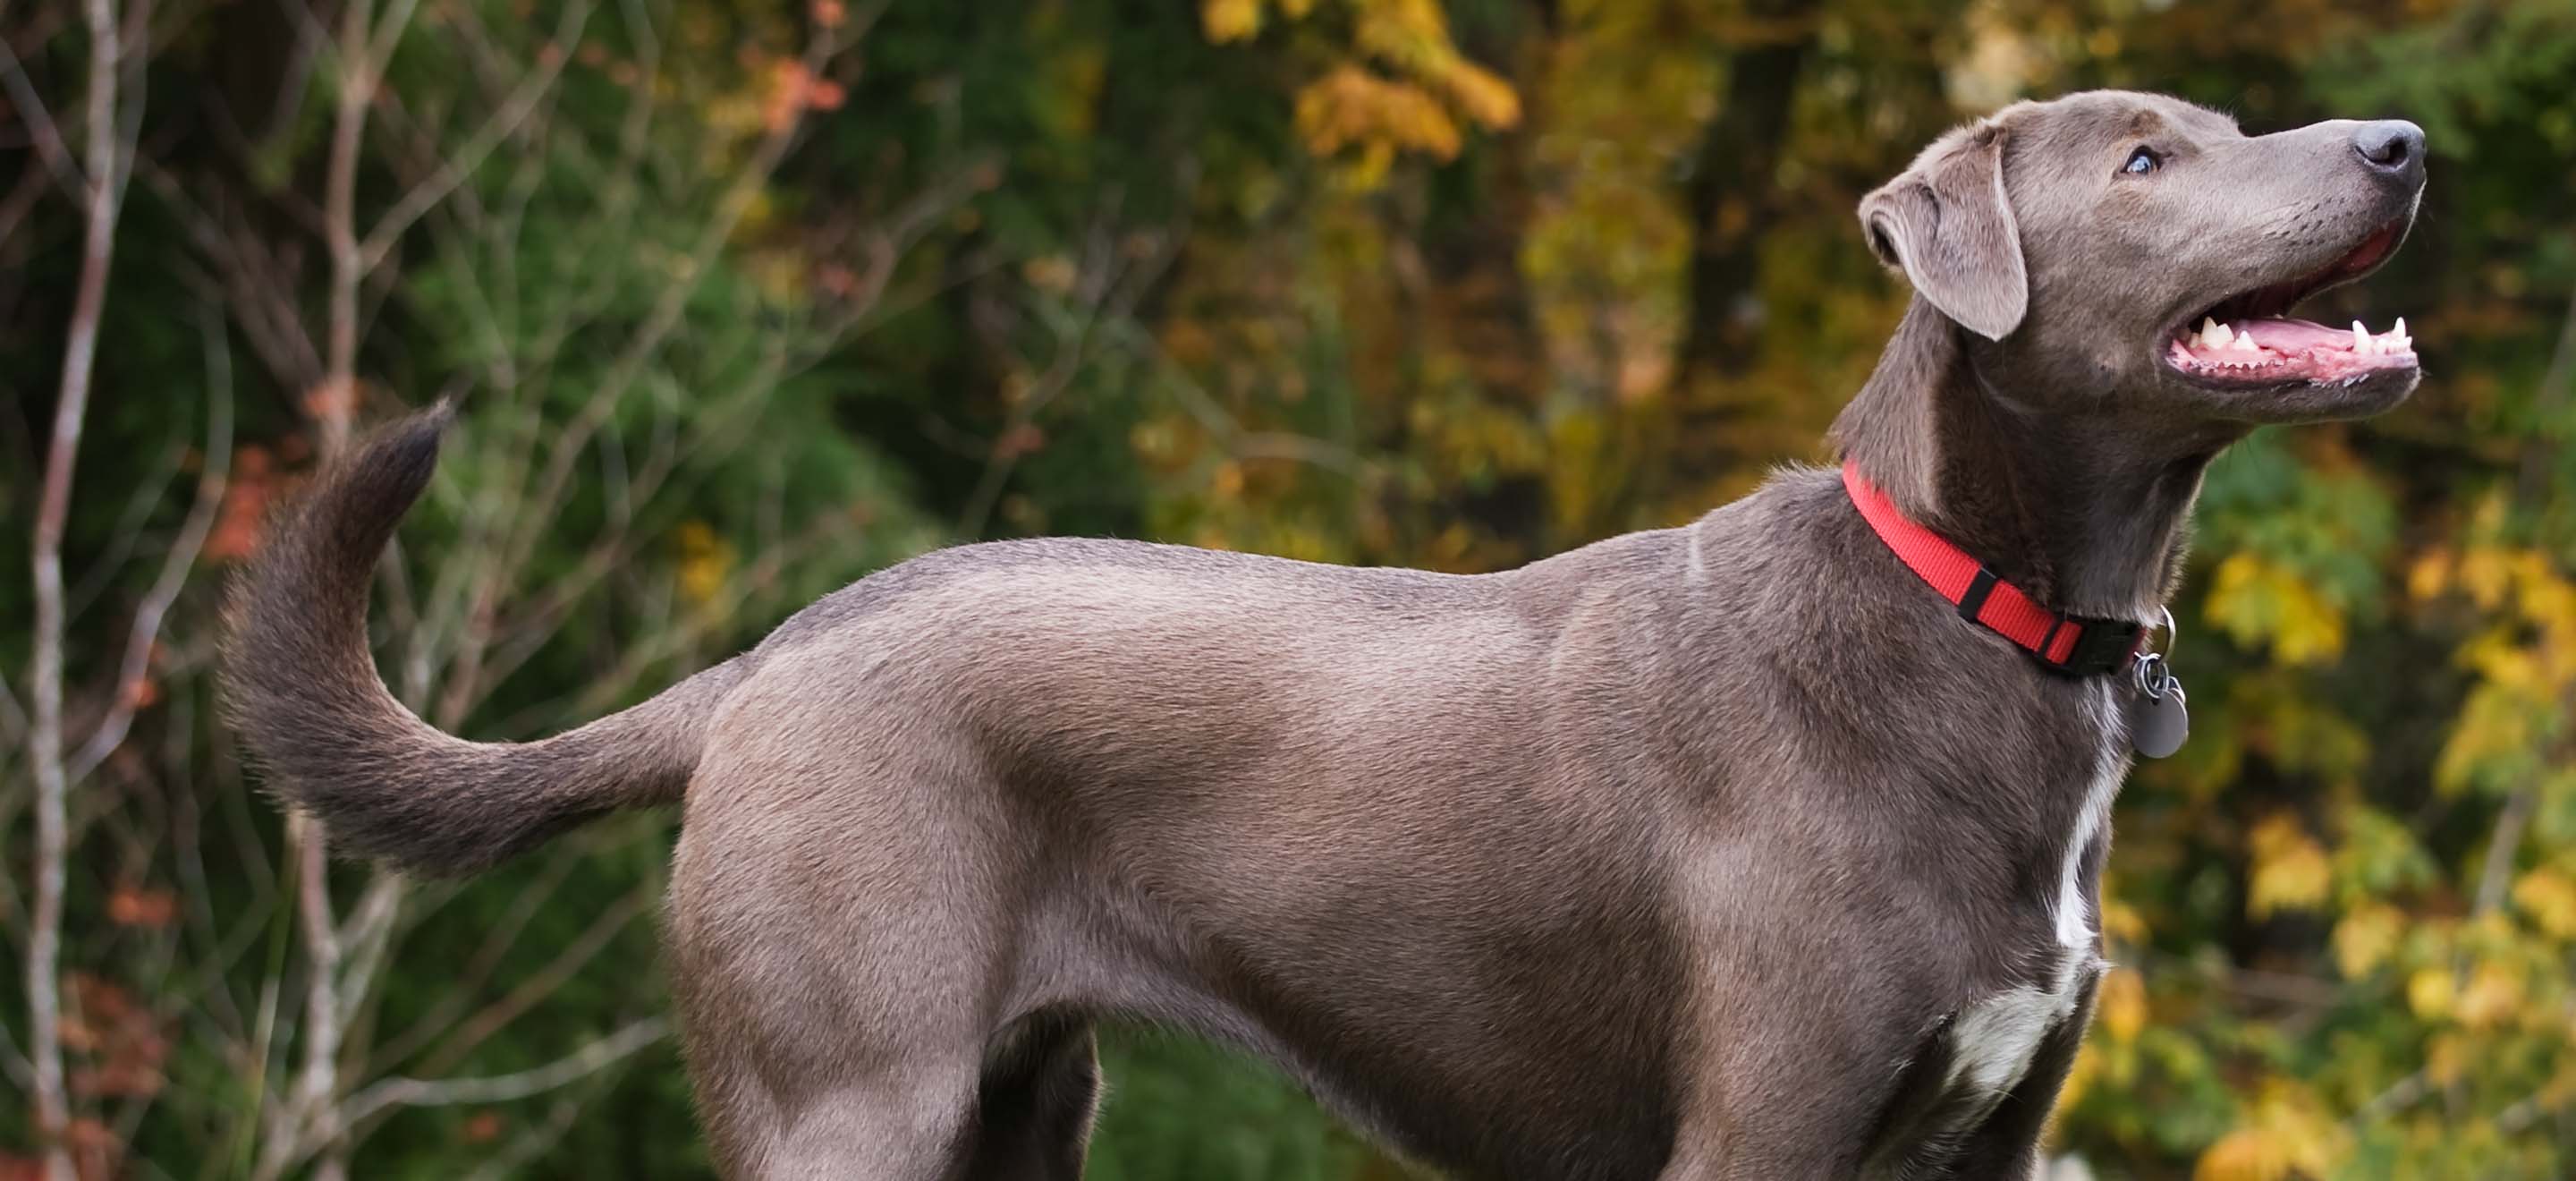 A Blue Lacy or Texas Lacy dog standing in front of trees in Autumn image